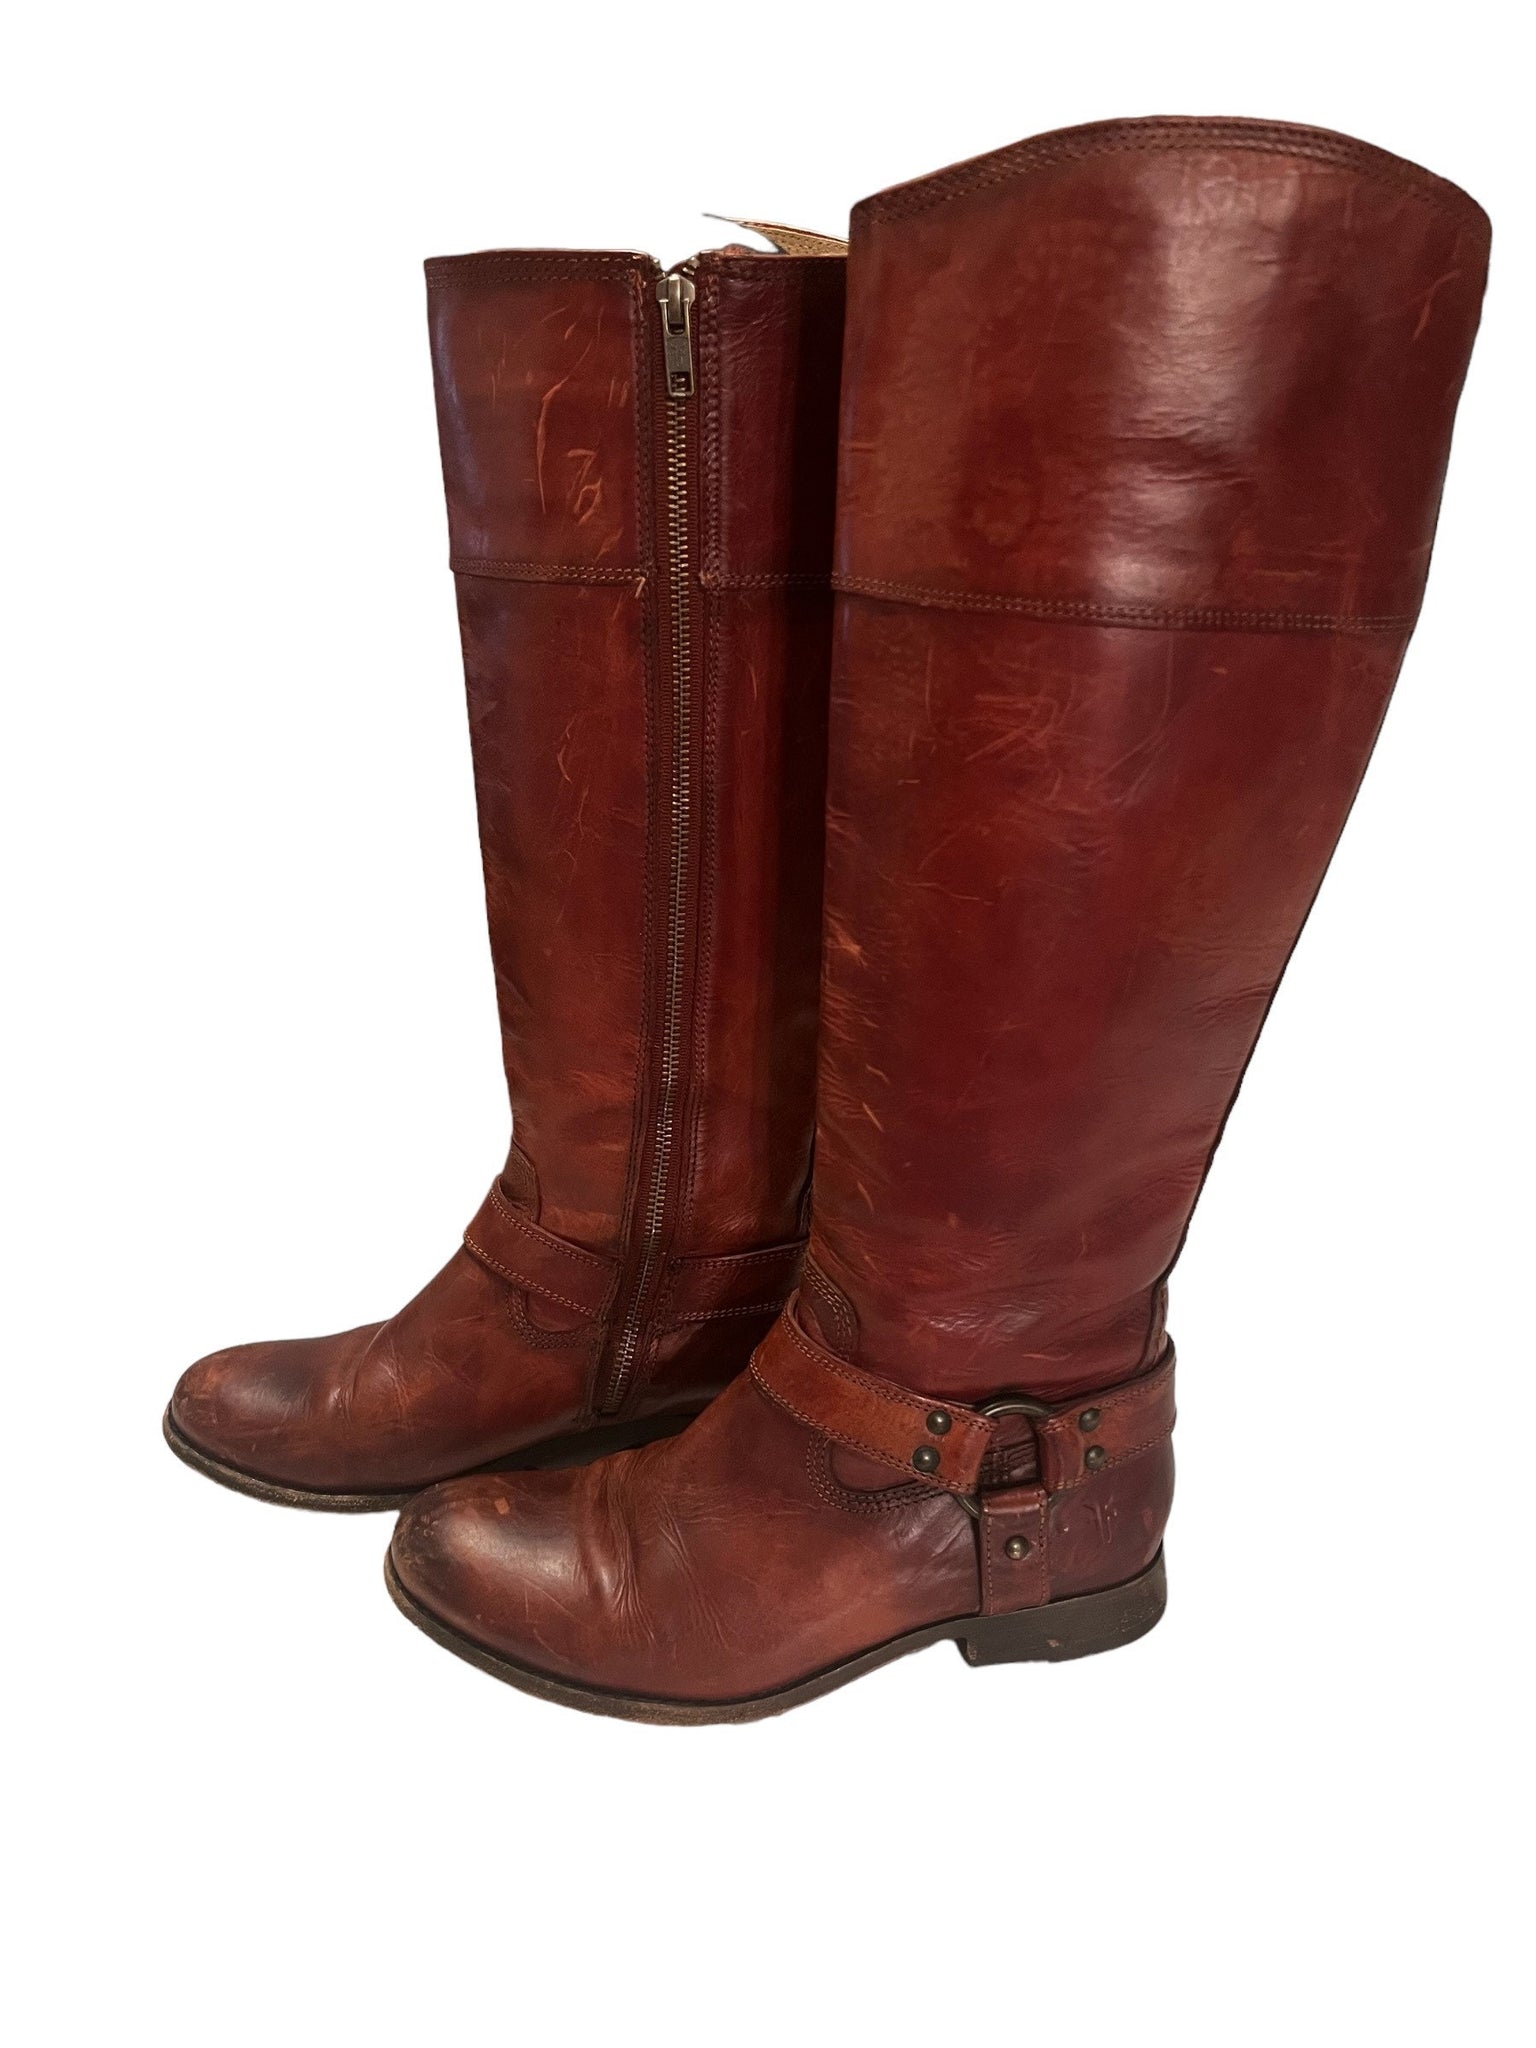 Vintage Frye brown riding harness knee boots 7.5 B